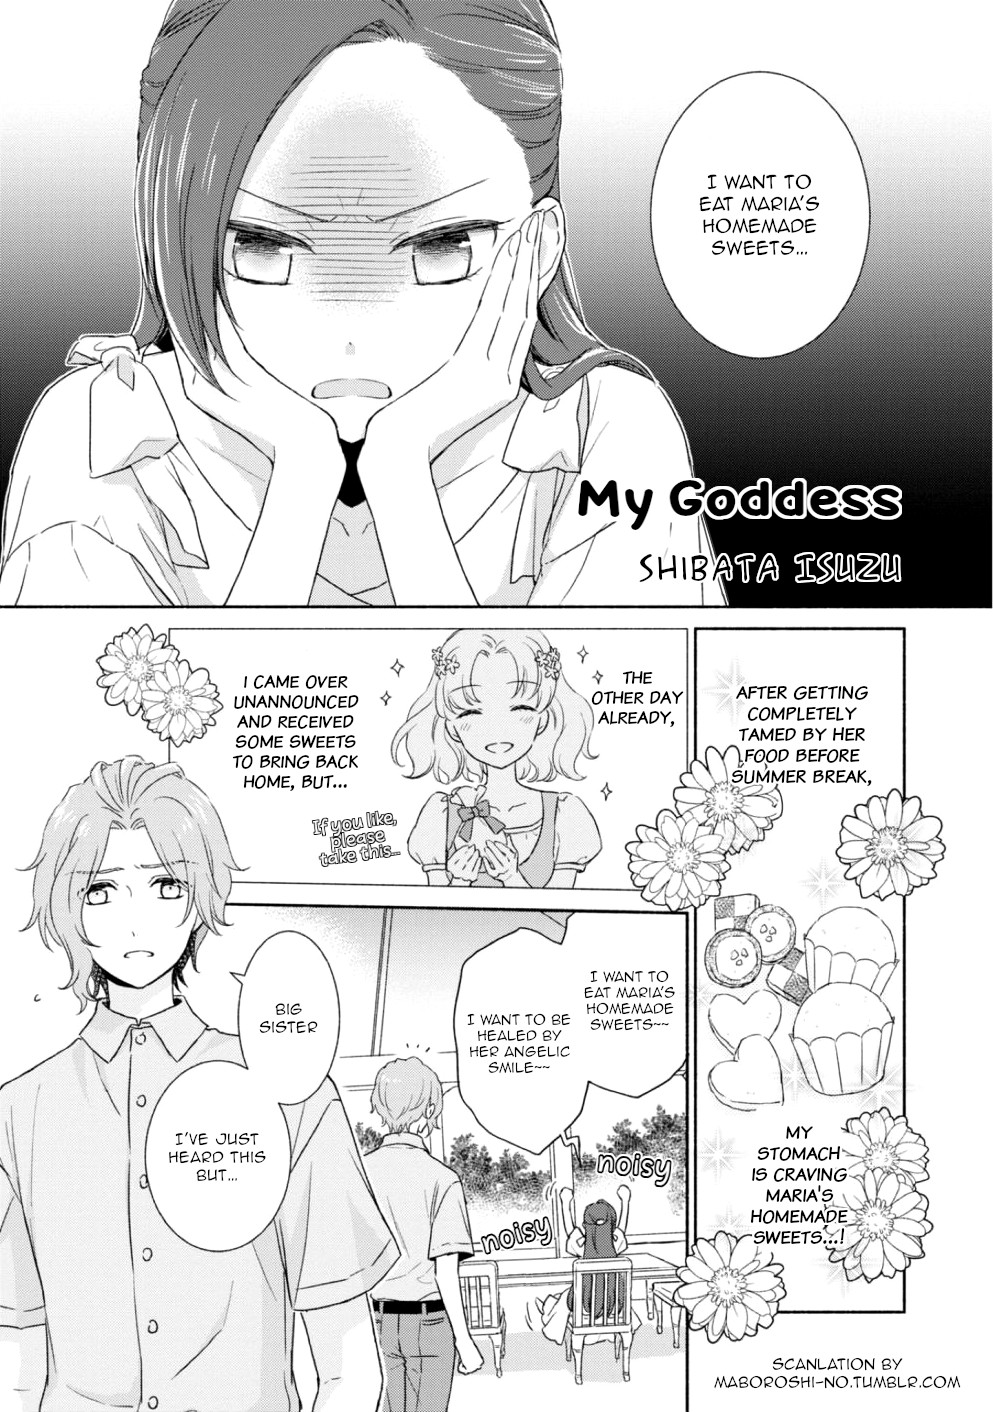 My Next Life As A Villainess: All Routes Lead To Doom! Official Anthology Comic - Sweet Memories Vol.1 Chapter 7: My Goddess (Artist: Shibata Isuzu) - Picture 1